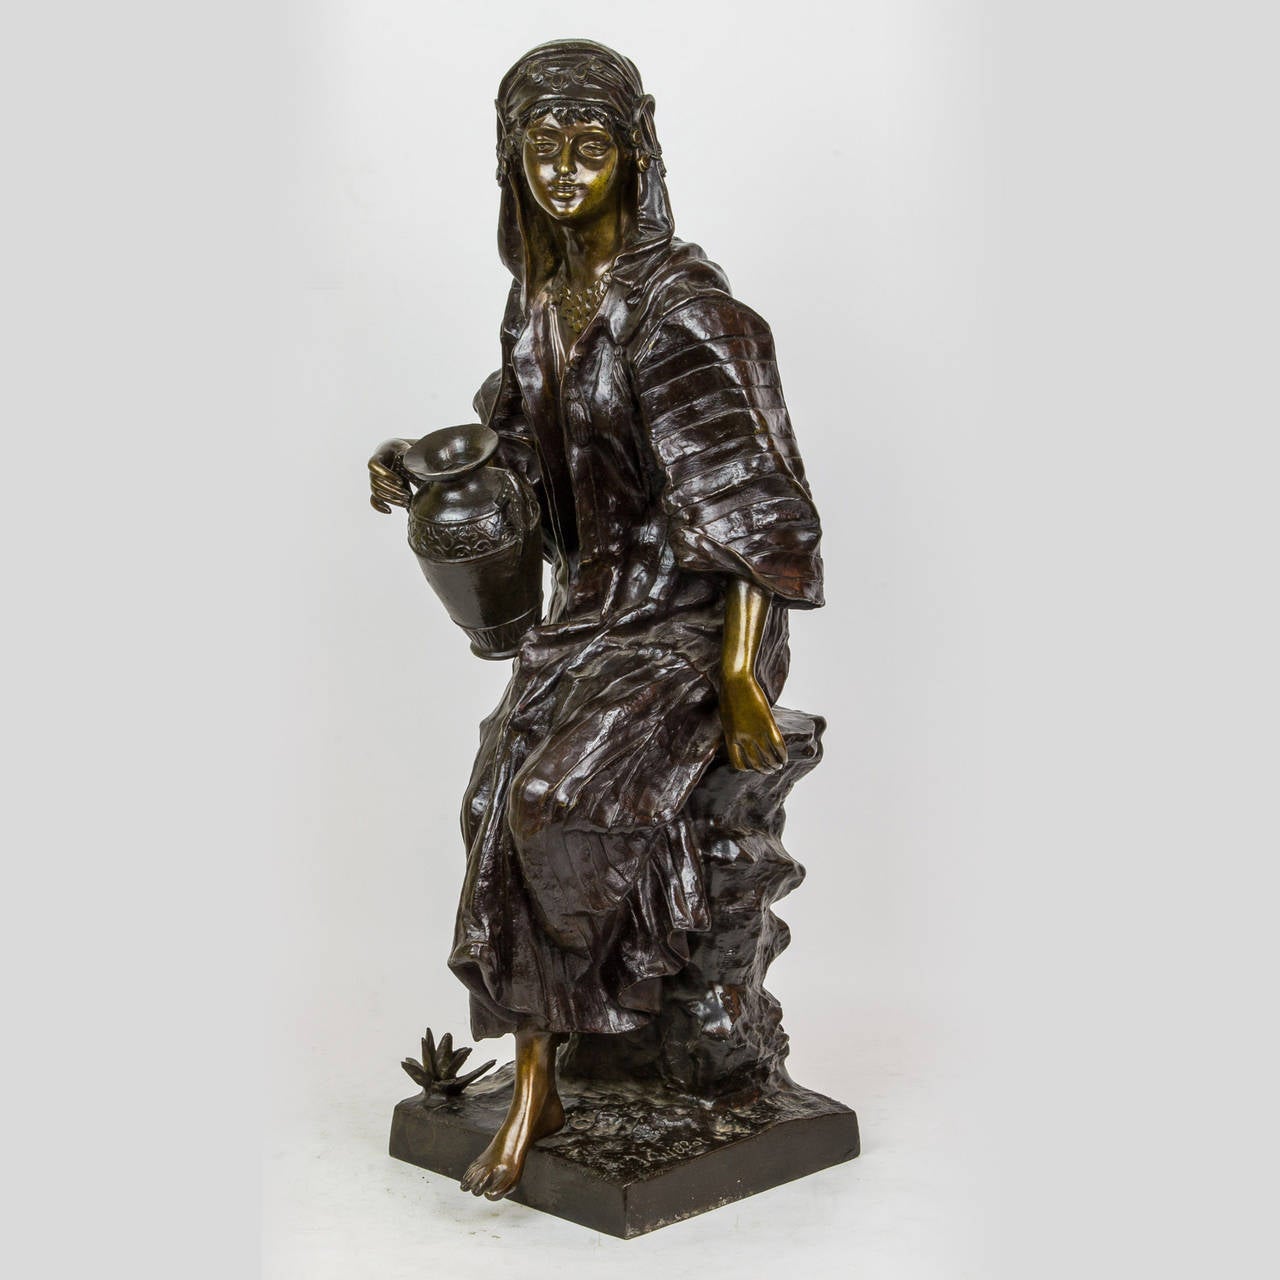 A Fine Orientalist Bronze Figure of a Gypsy seated on Rocks Holding Water Jug signed J. Guellot
Stock Number: SC90